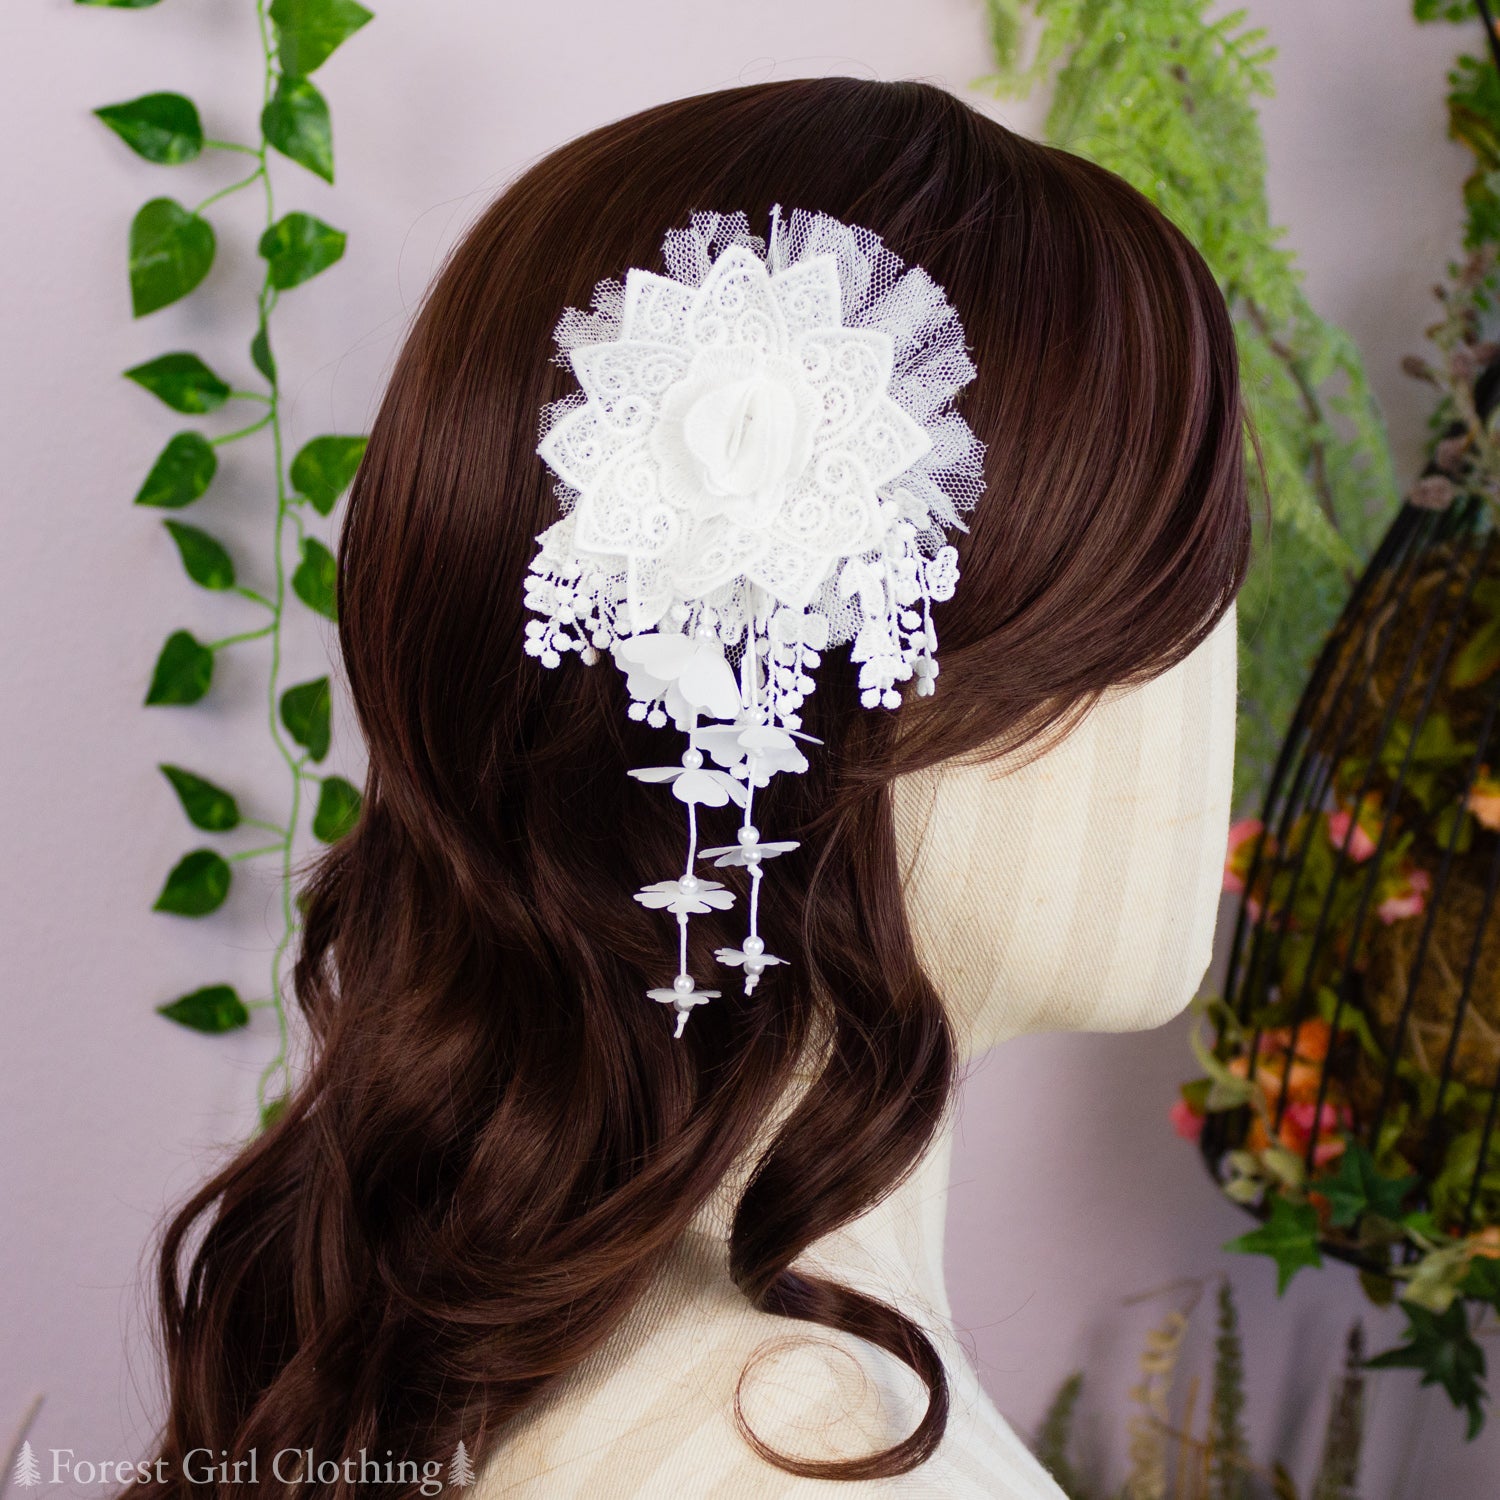 Lily of the Valley Bridal Veil w/ Headband Flower Crown Handmade Tulle  Headpiece